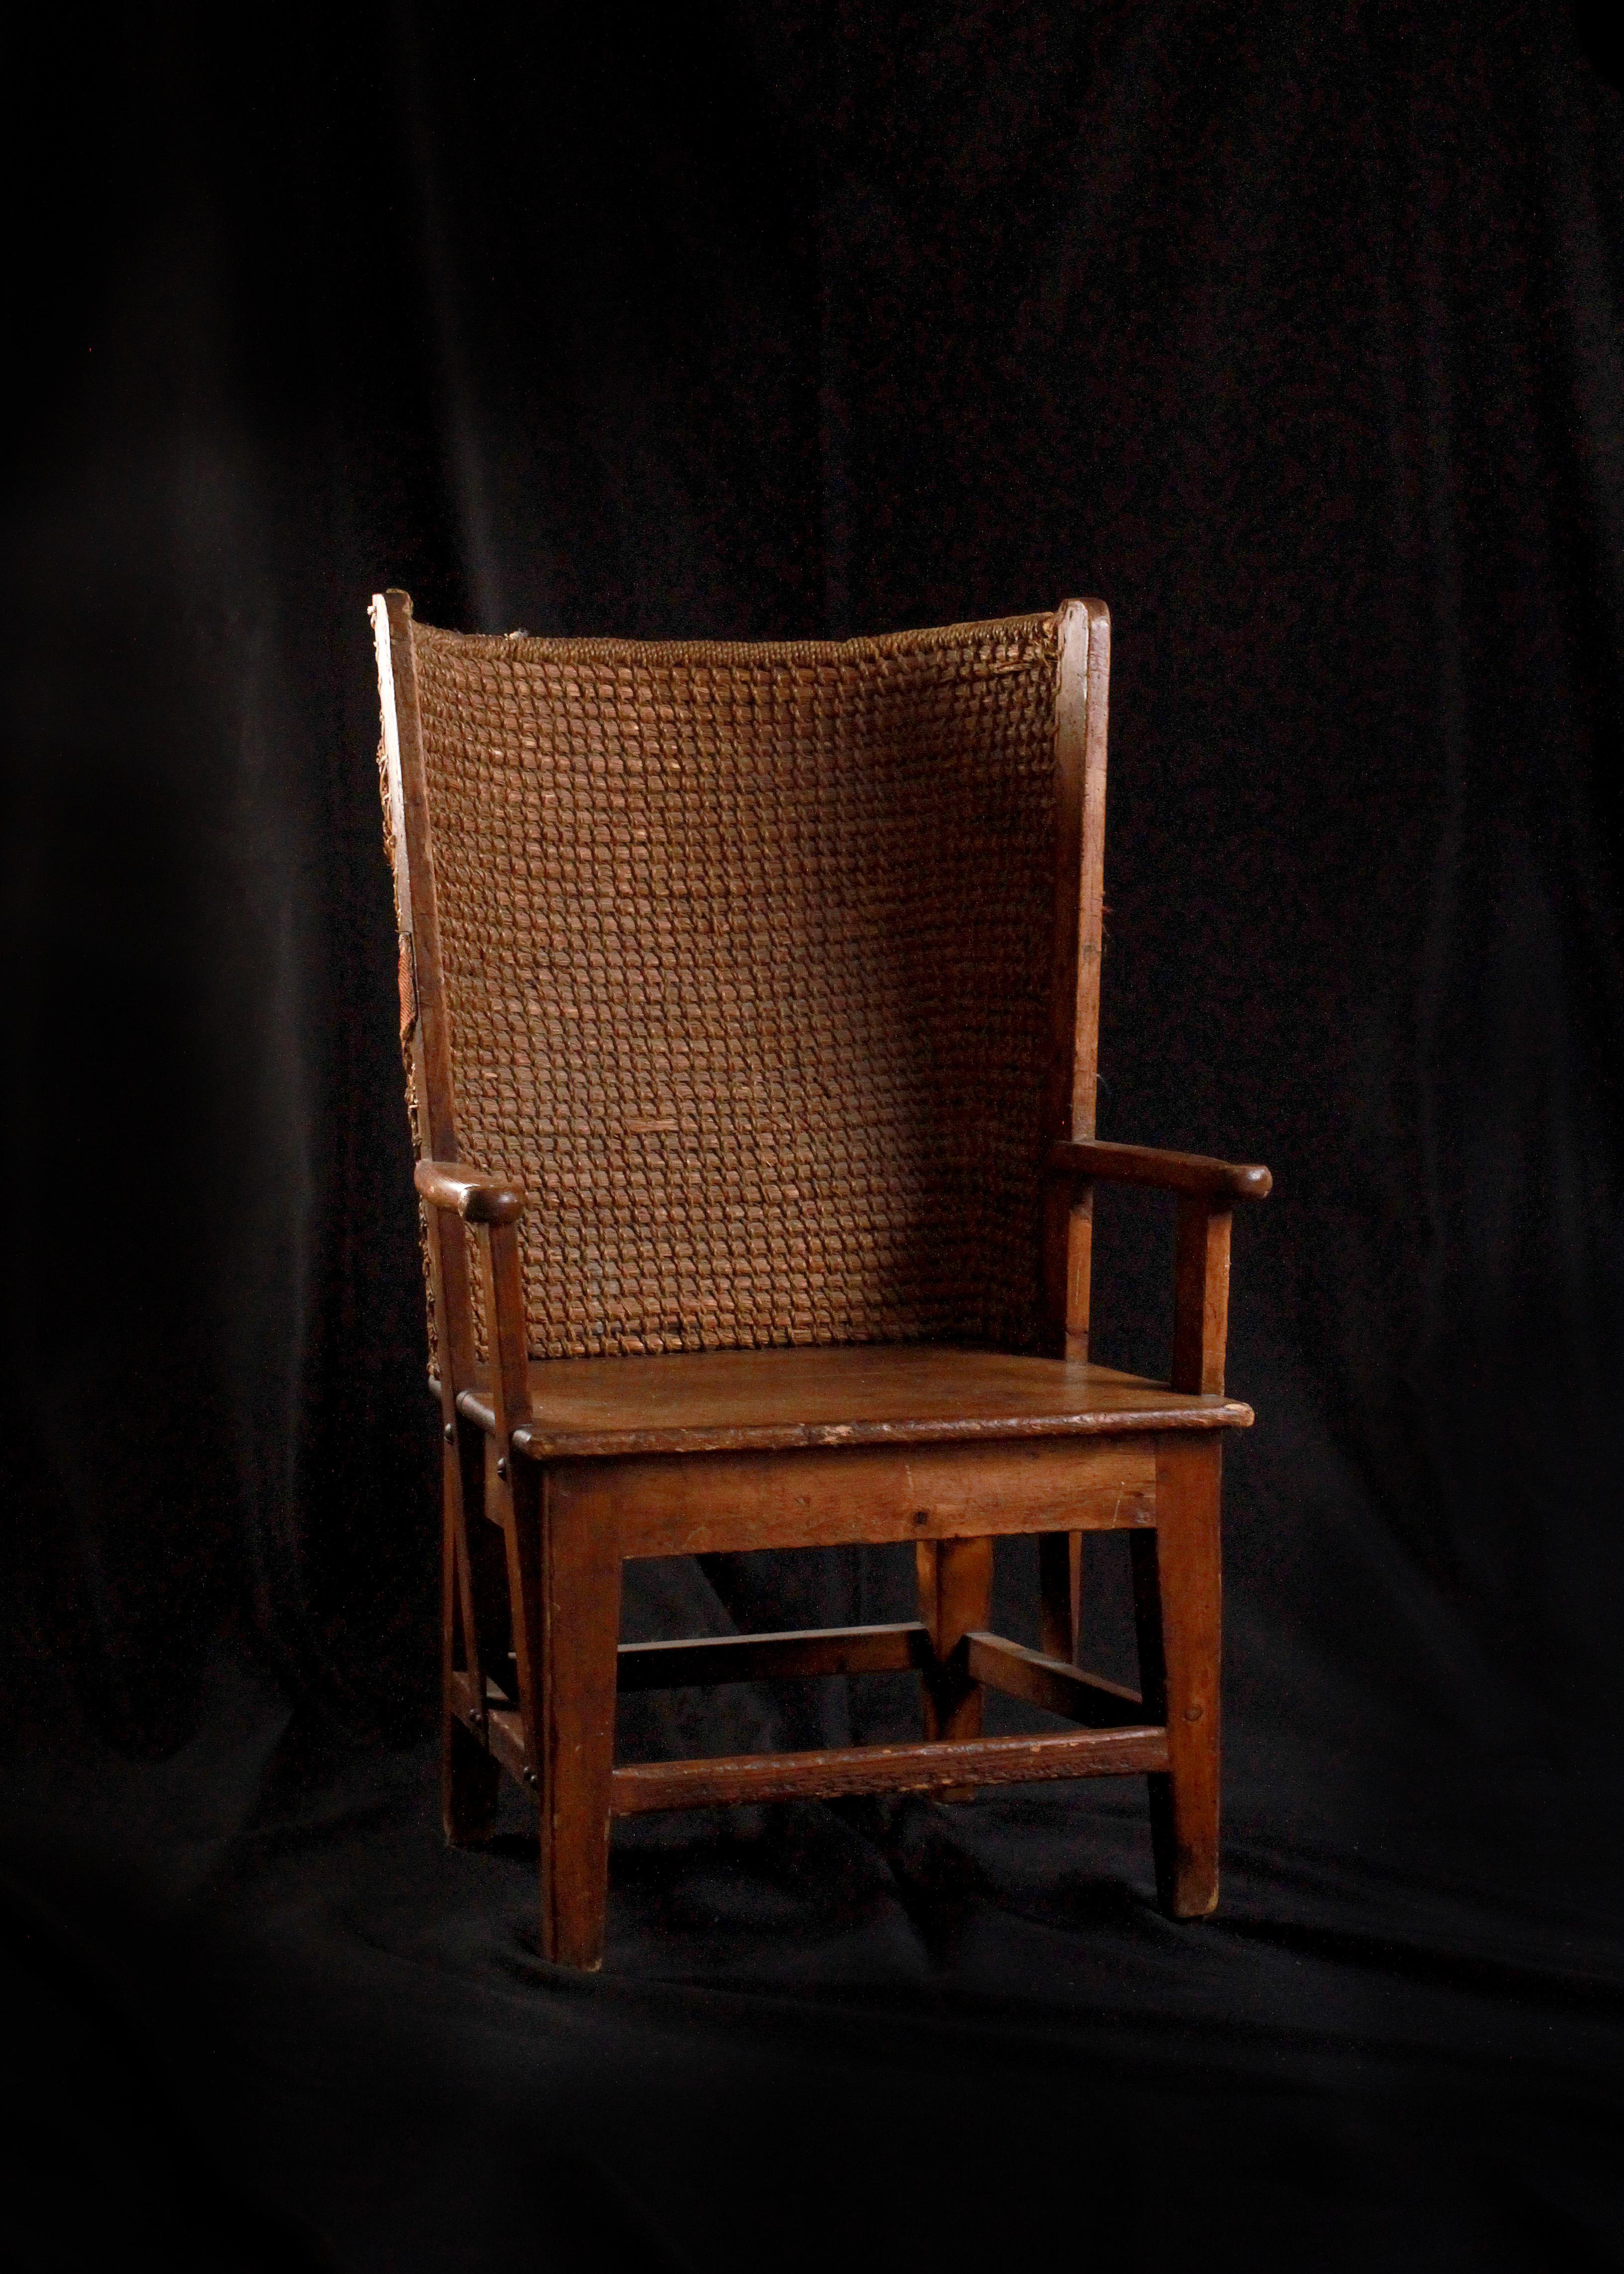 This exquisite Orkney Island chair, a testament to traditional craftsmanship, beckons visitors to step back in time. Carved with care and precision in the year 1900, it embodies the rustic charm and practical elegance of the Orkney